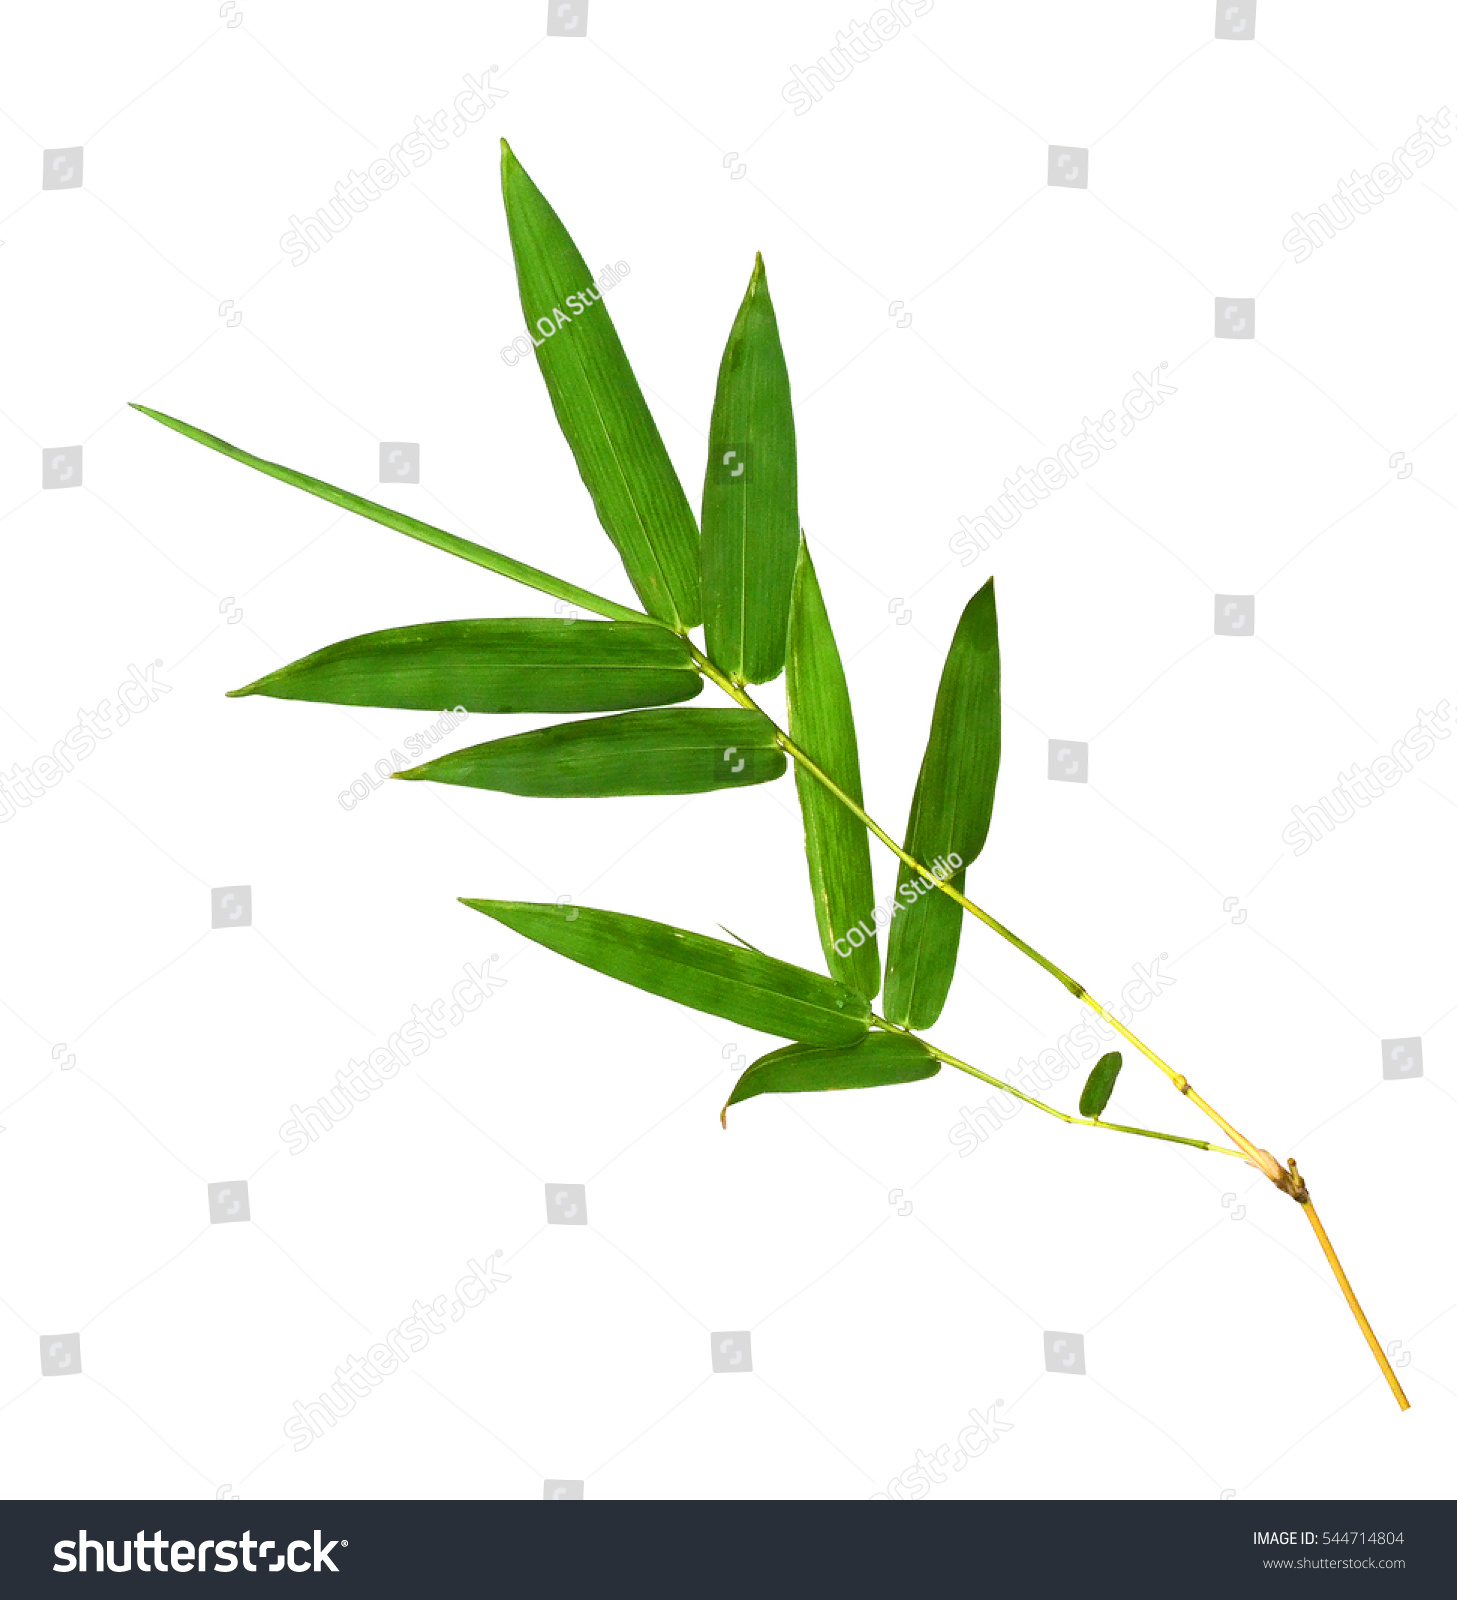 Green Bamboo Leaves Isolated On White Stock Photo 544714804 ...